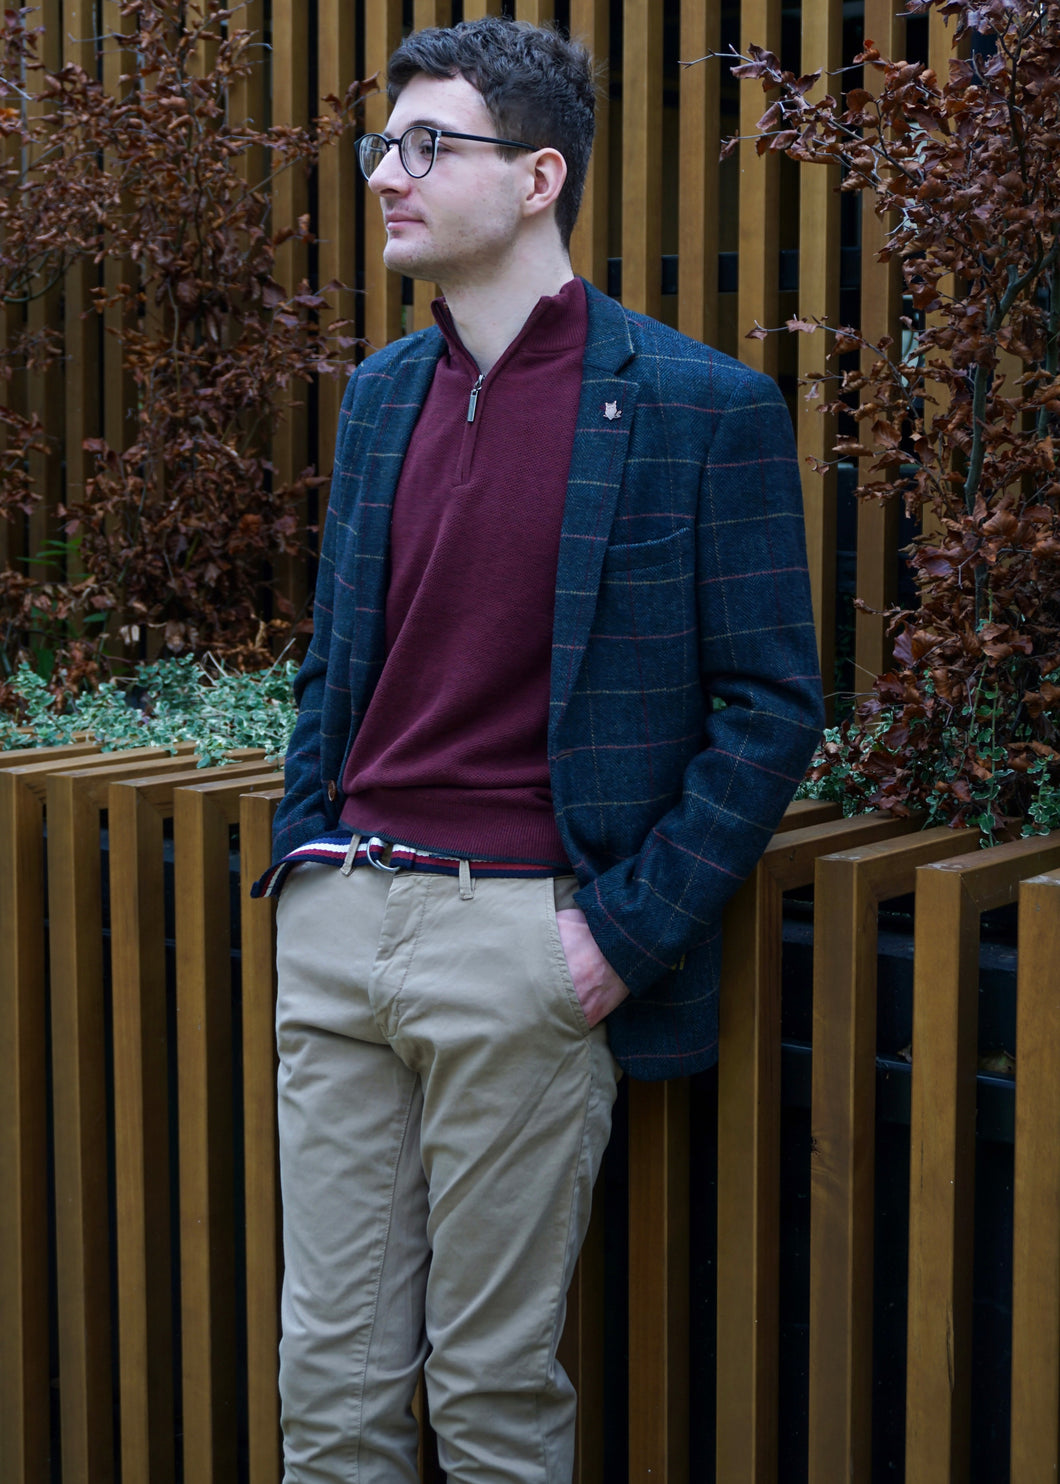 Smart casual winter outfit for men with suit jacket, chinos, and a quarter-zip jumper.